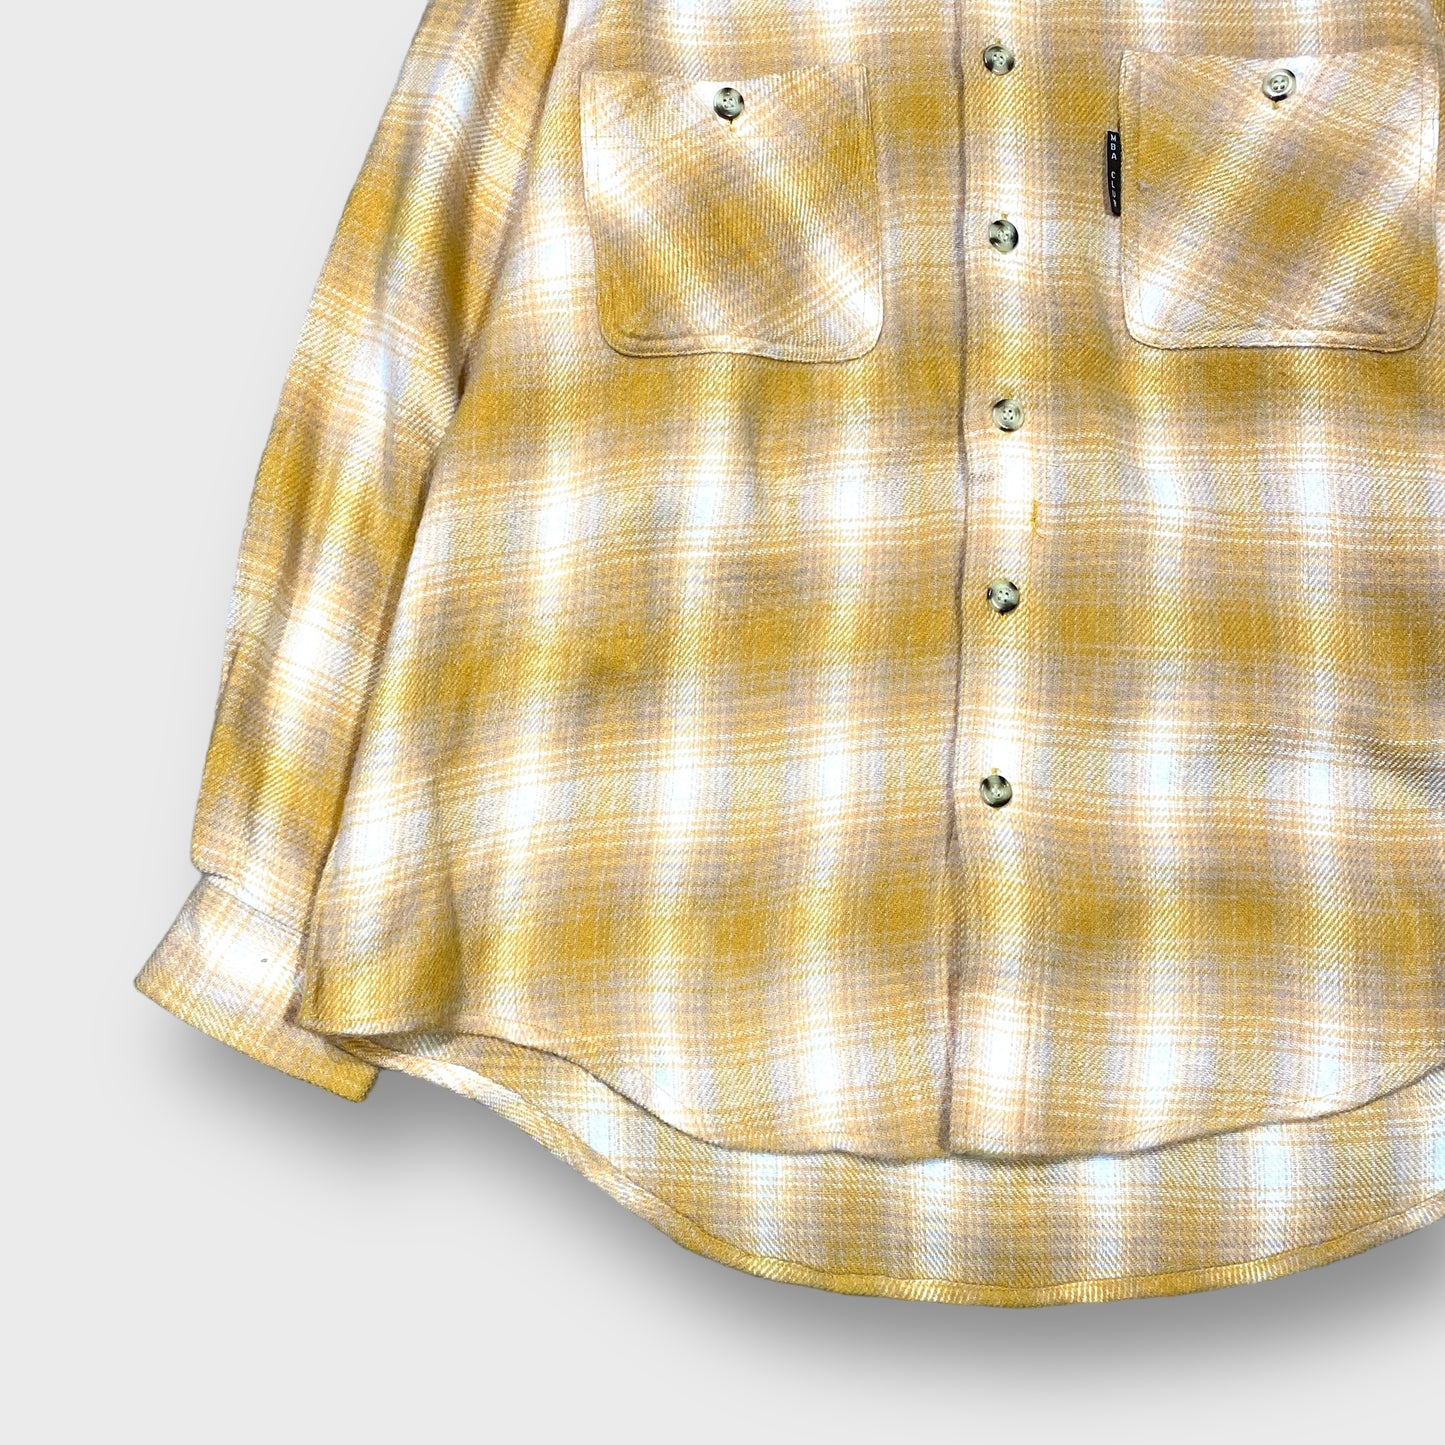 90's "MBA" Ombre check pattern heavy flannel shirt